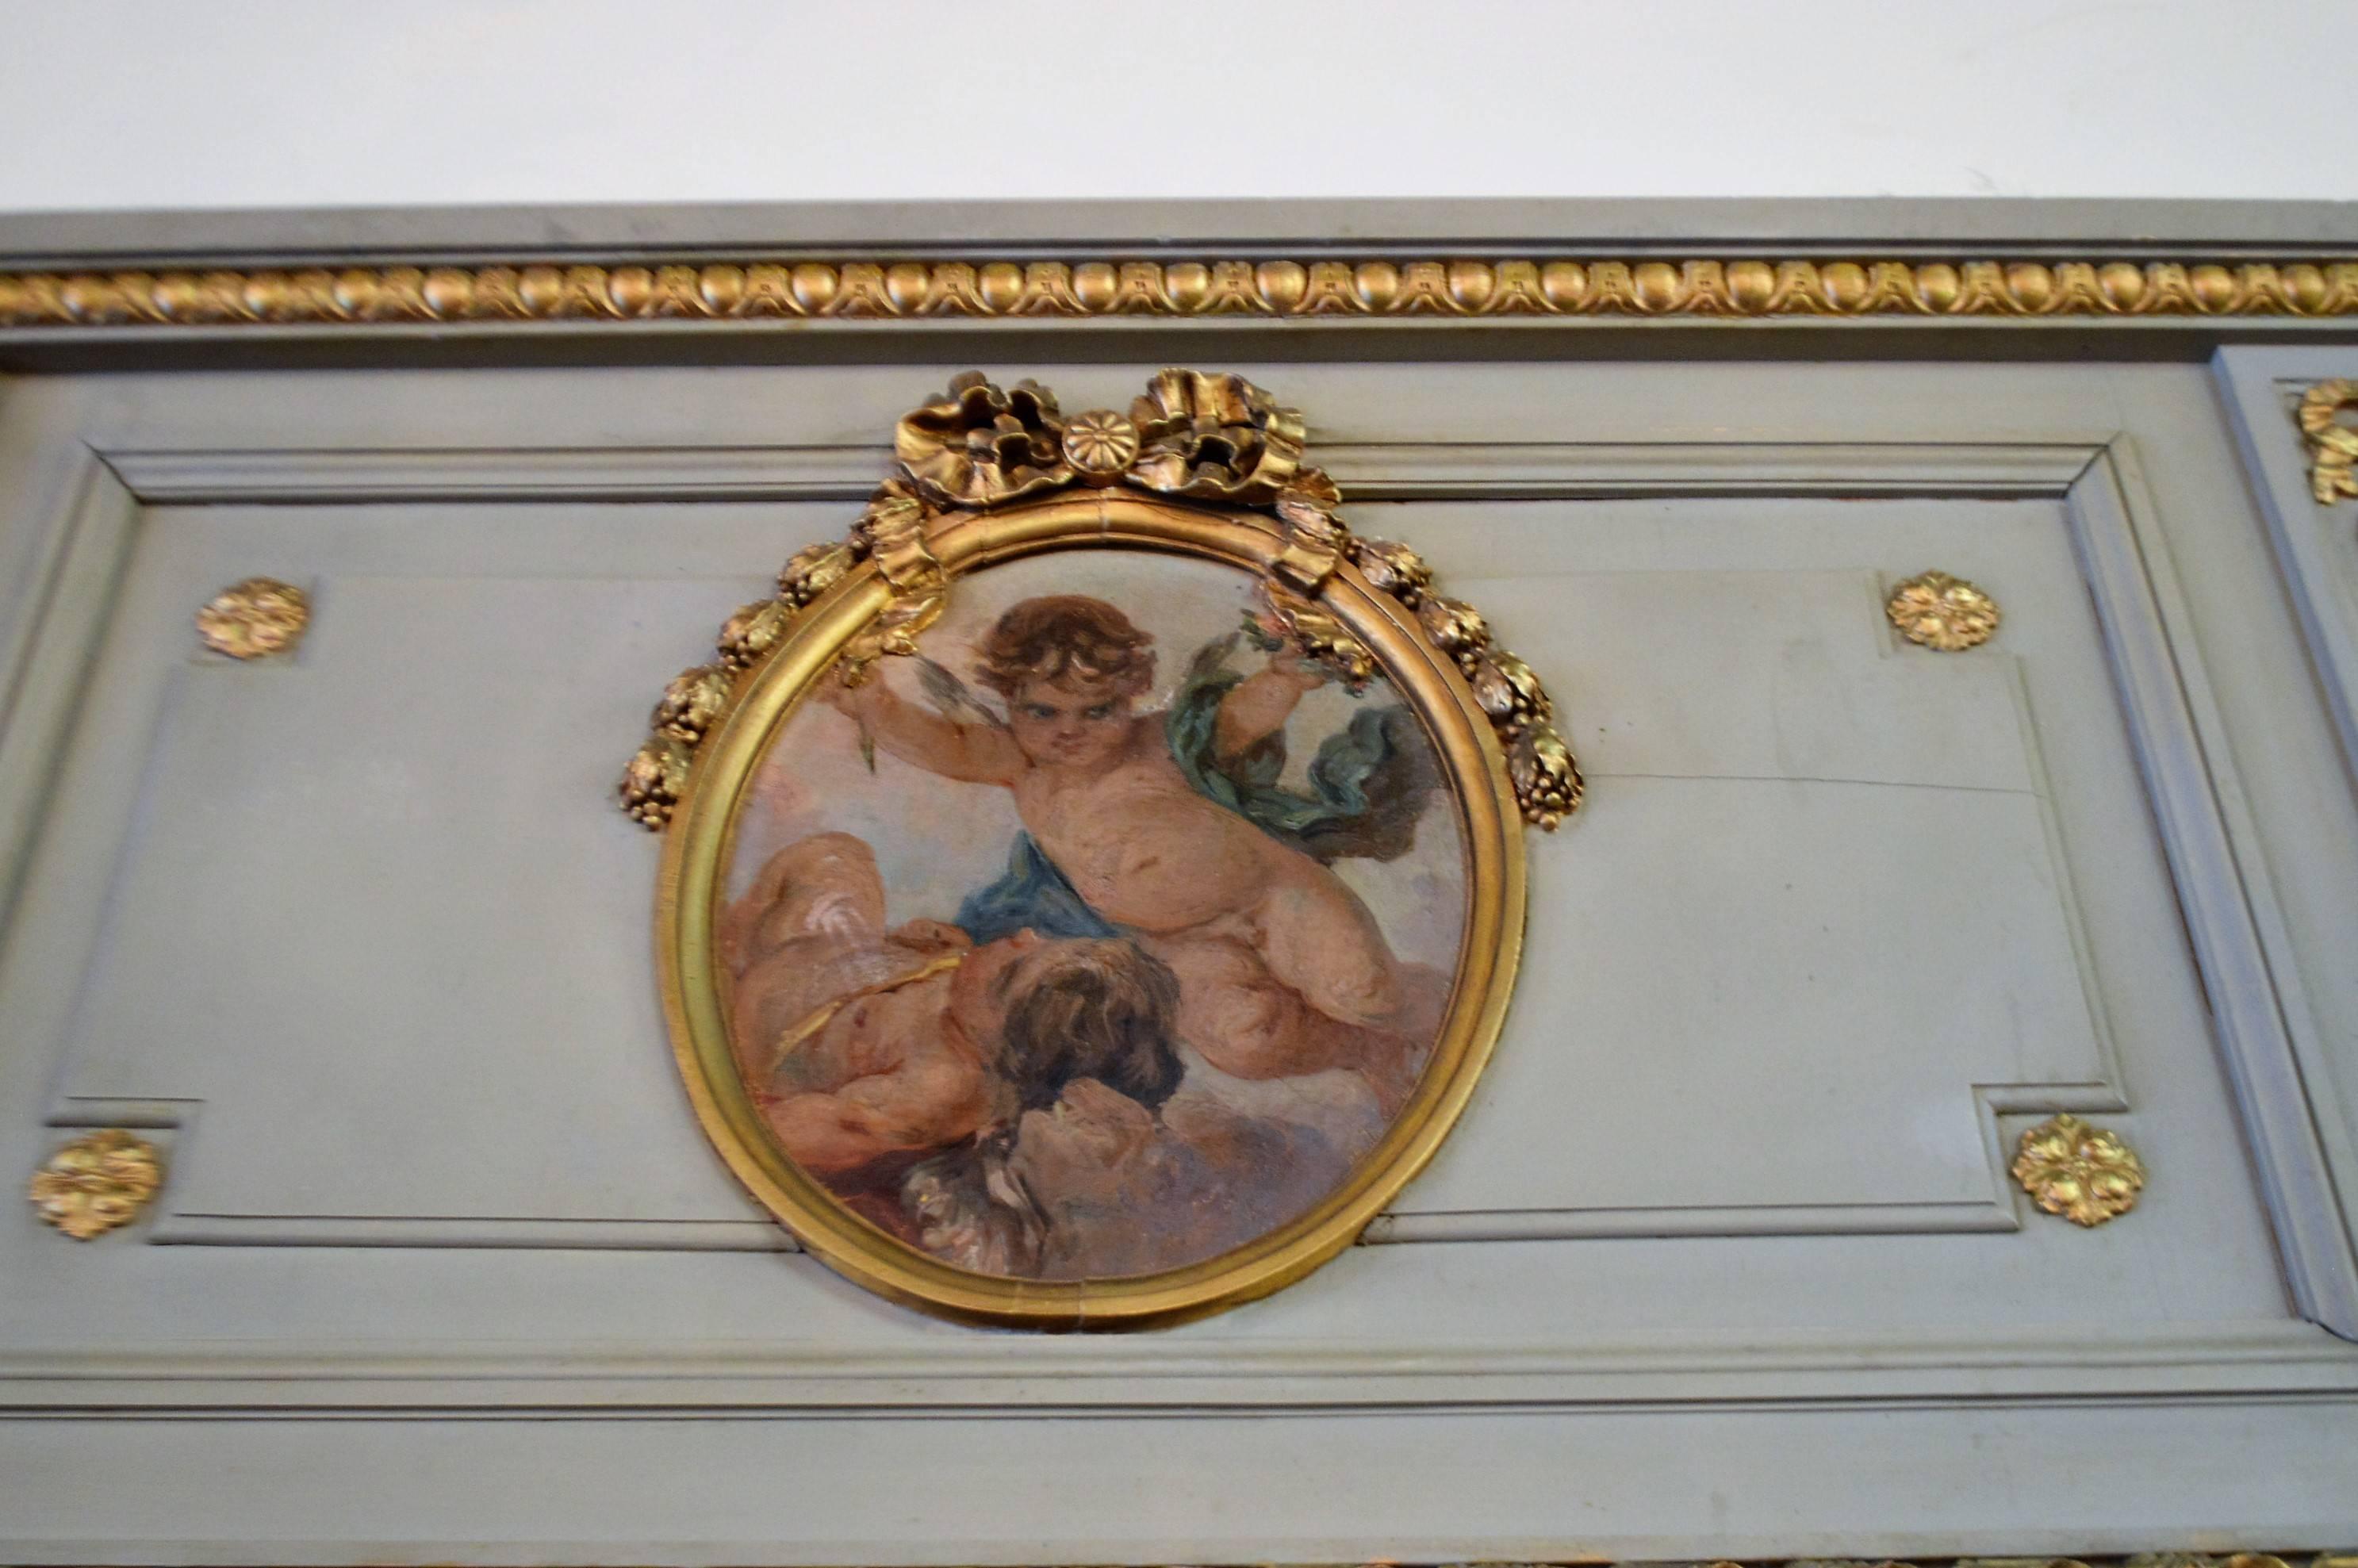 Louis XVI style, large and splendid painted trumeau mirror.
The oil painting inserted in the oval medallion represent cherubs, the medallion is framed with gilded molding and the Louis XVI bow details at top.
The patina on the frame is a lovely